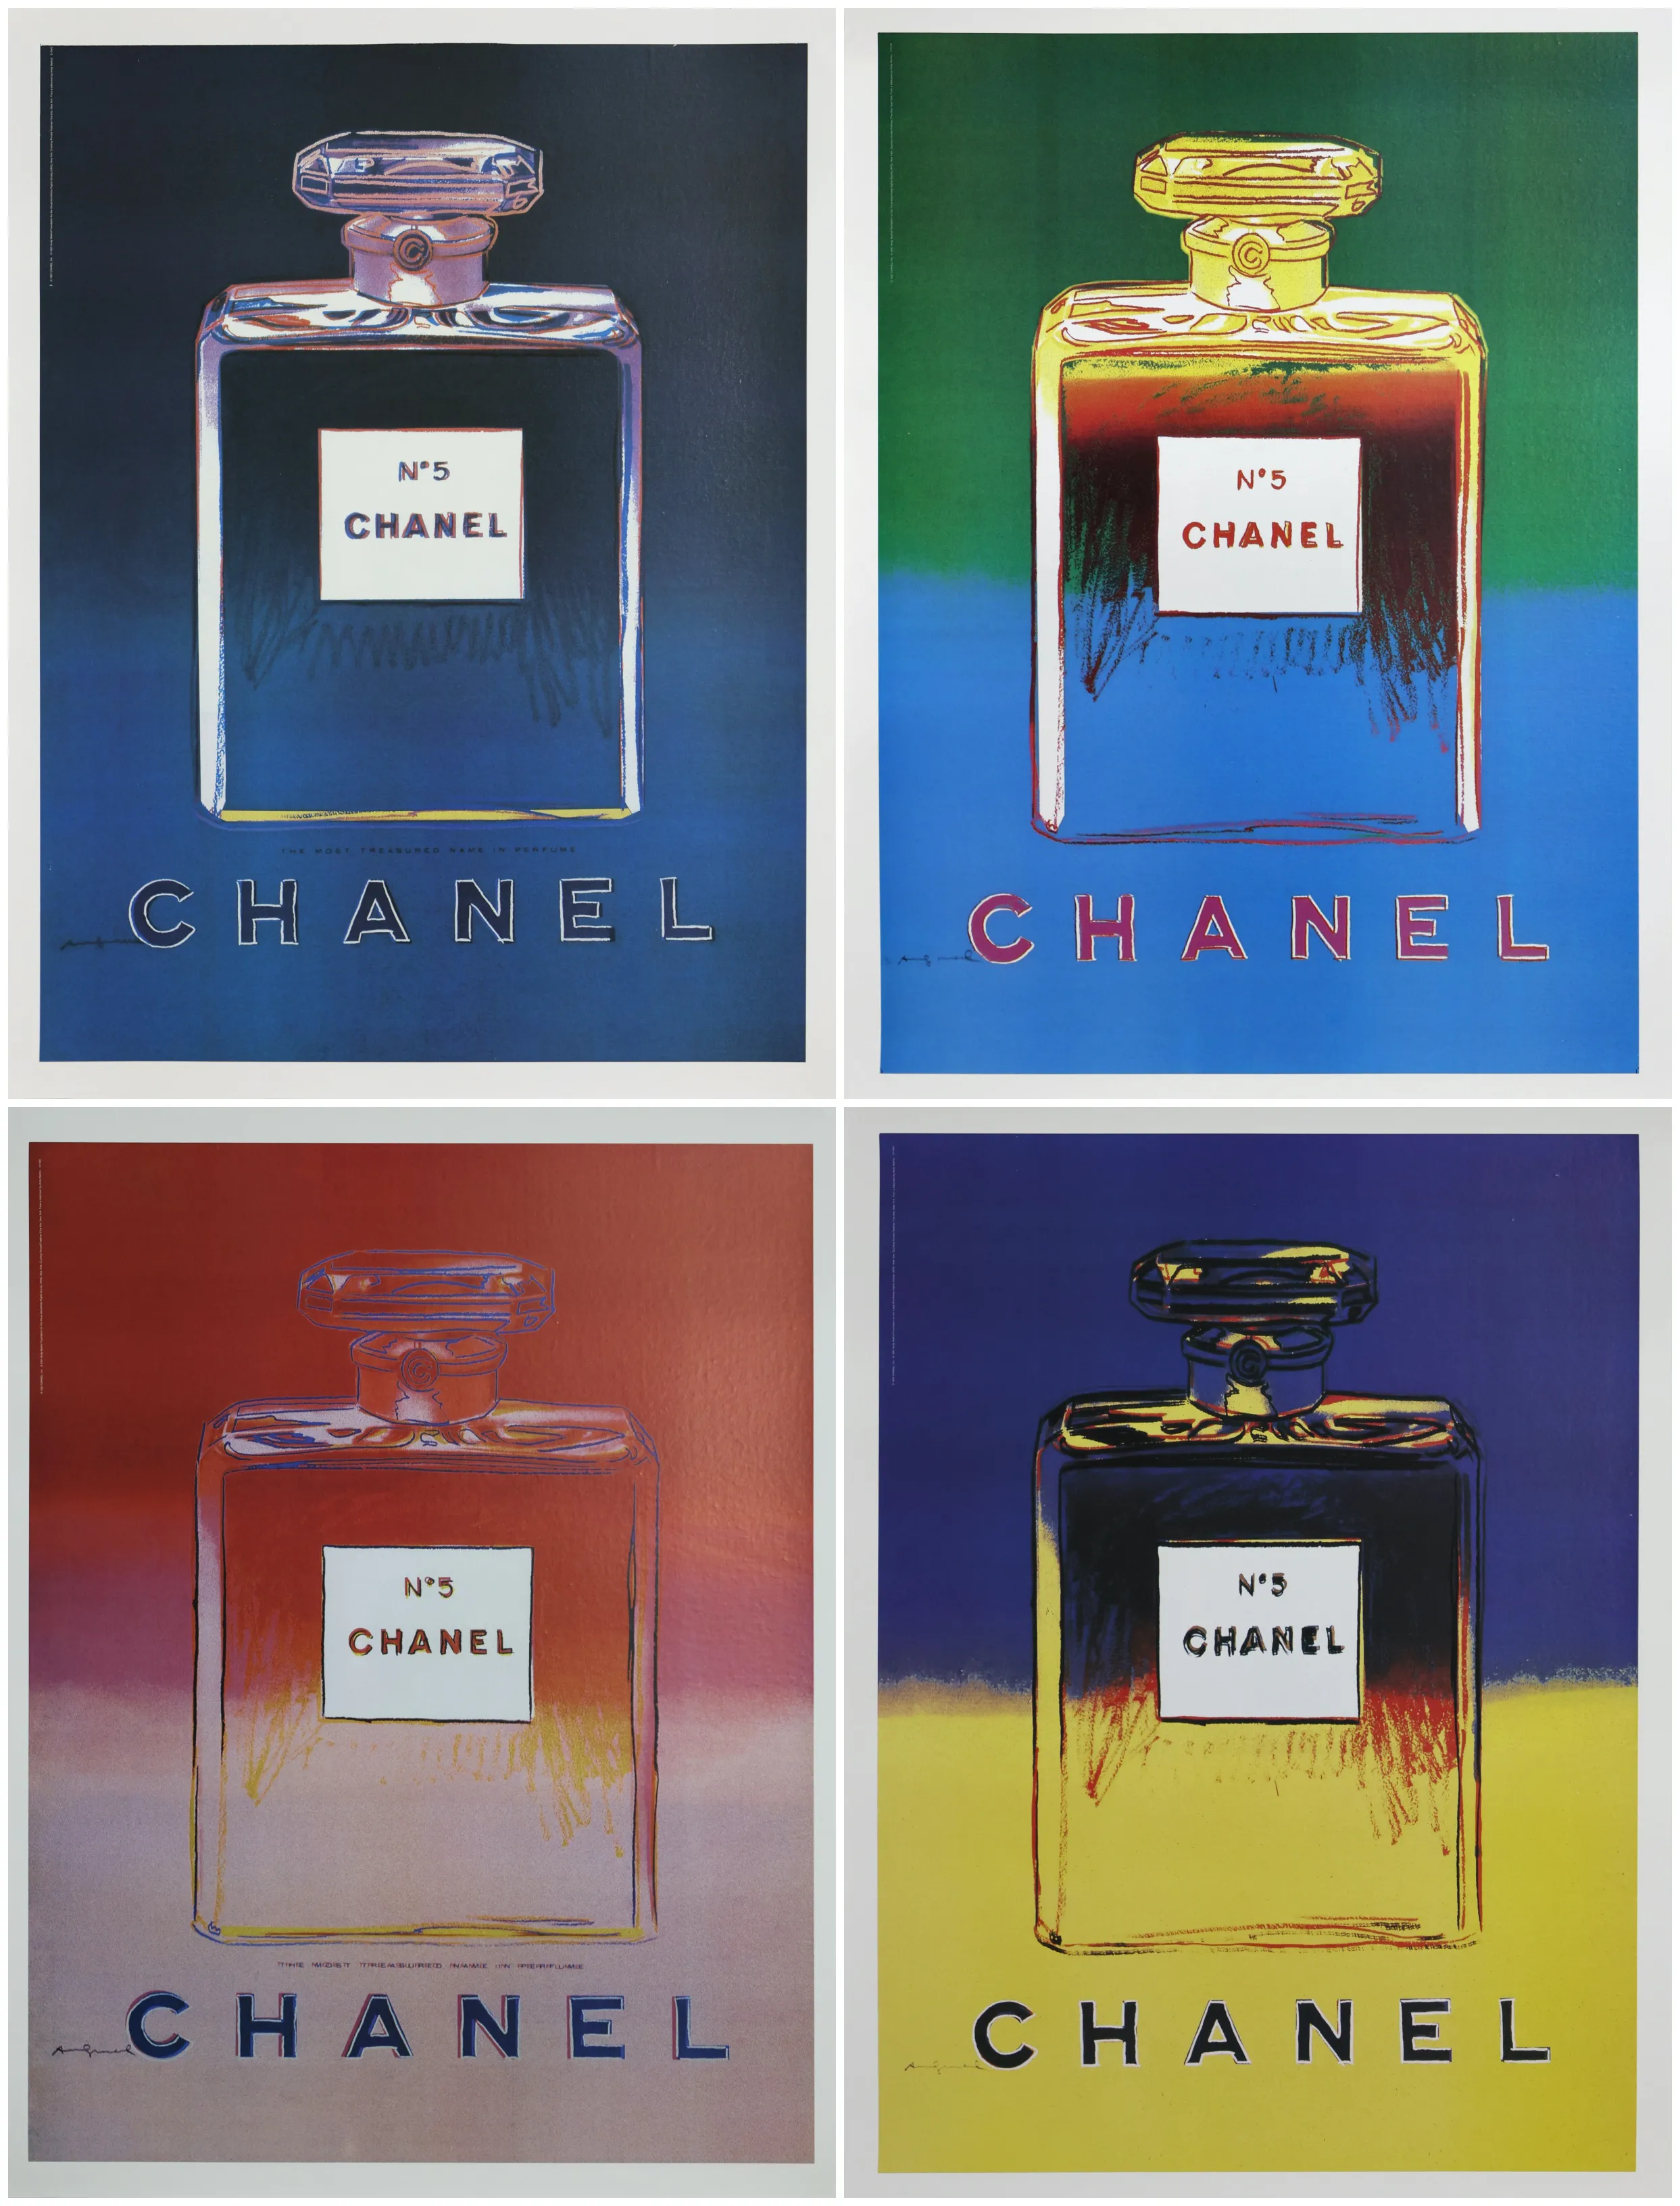 Andy Warhol - Chanel No. 5 (Suite of Four Posters)